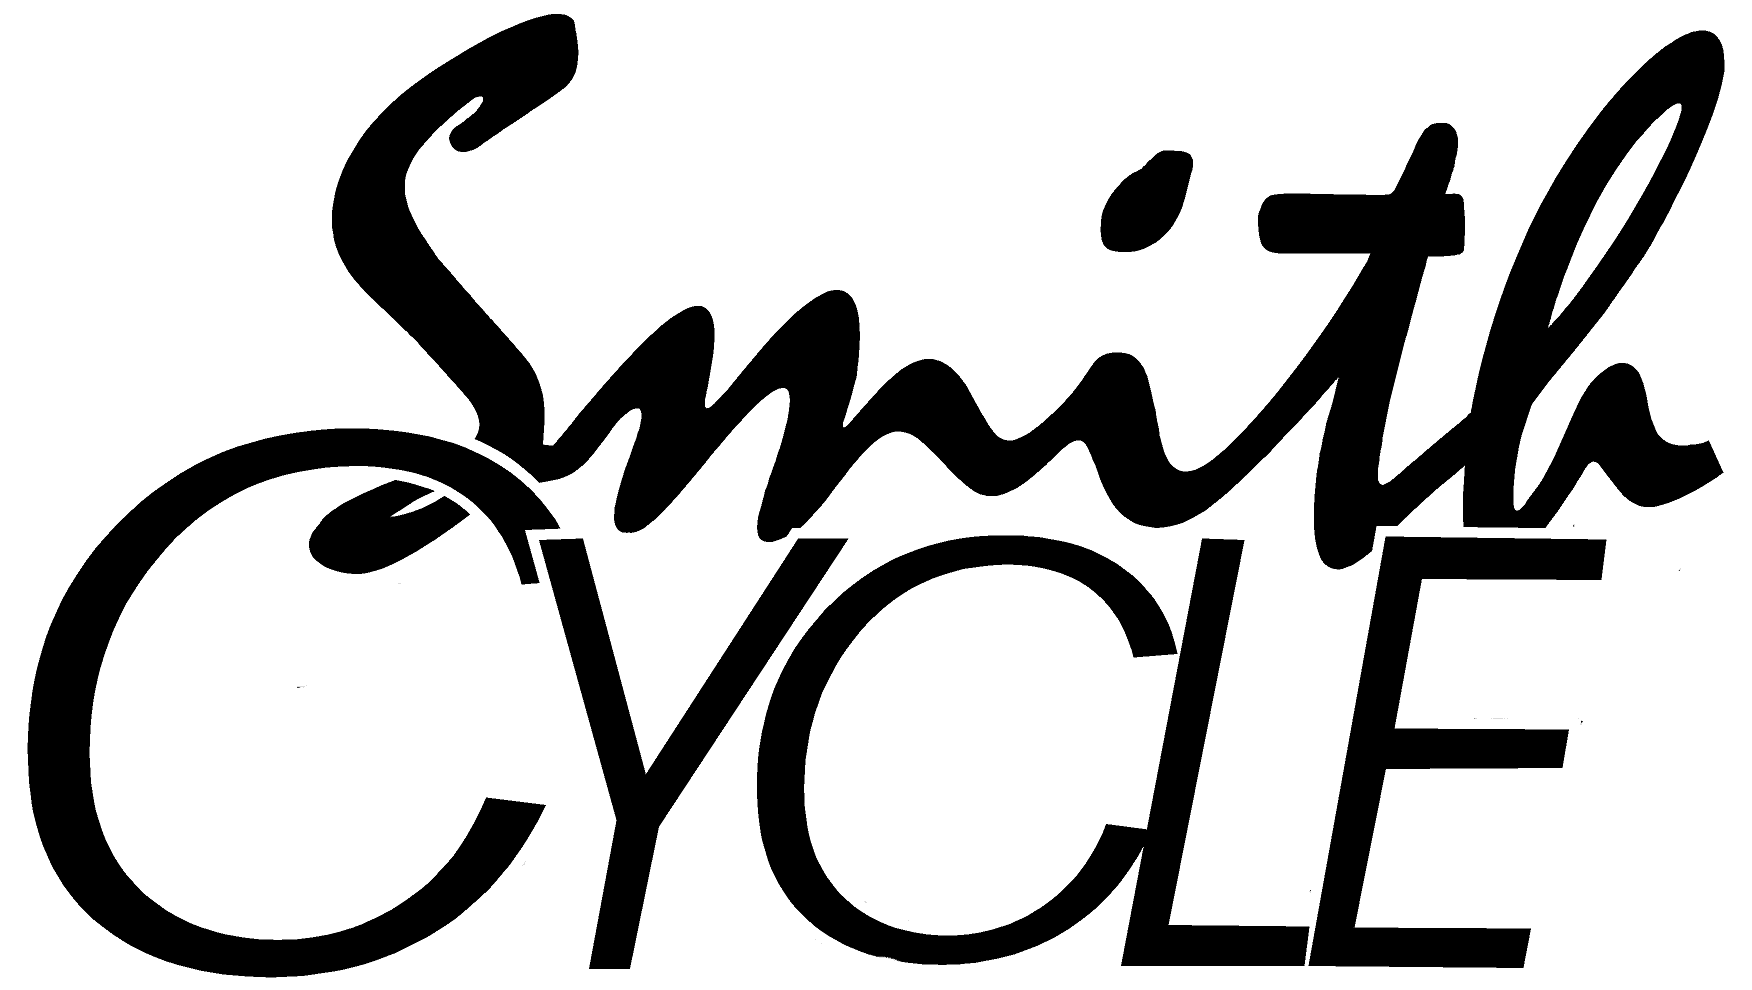 Smith Cycle & More